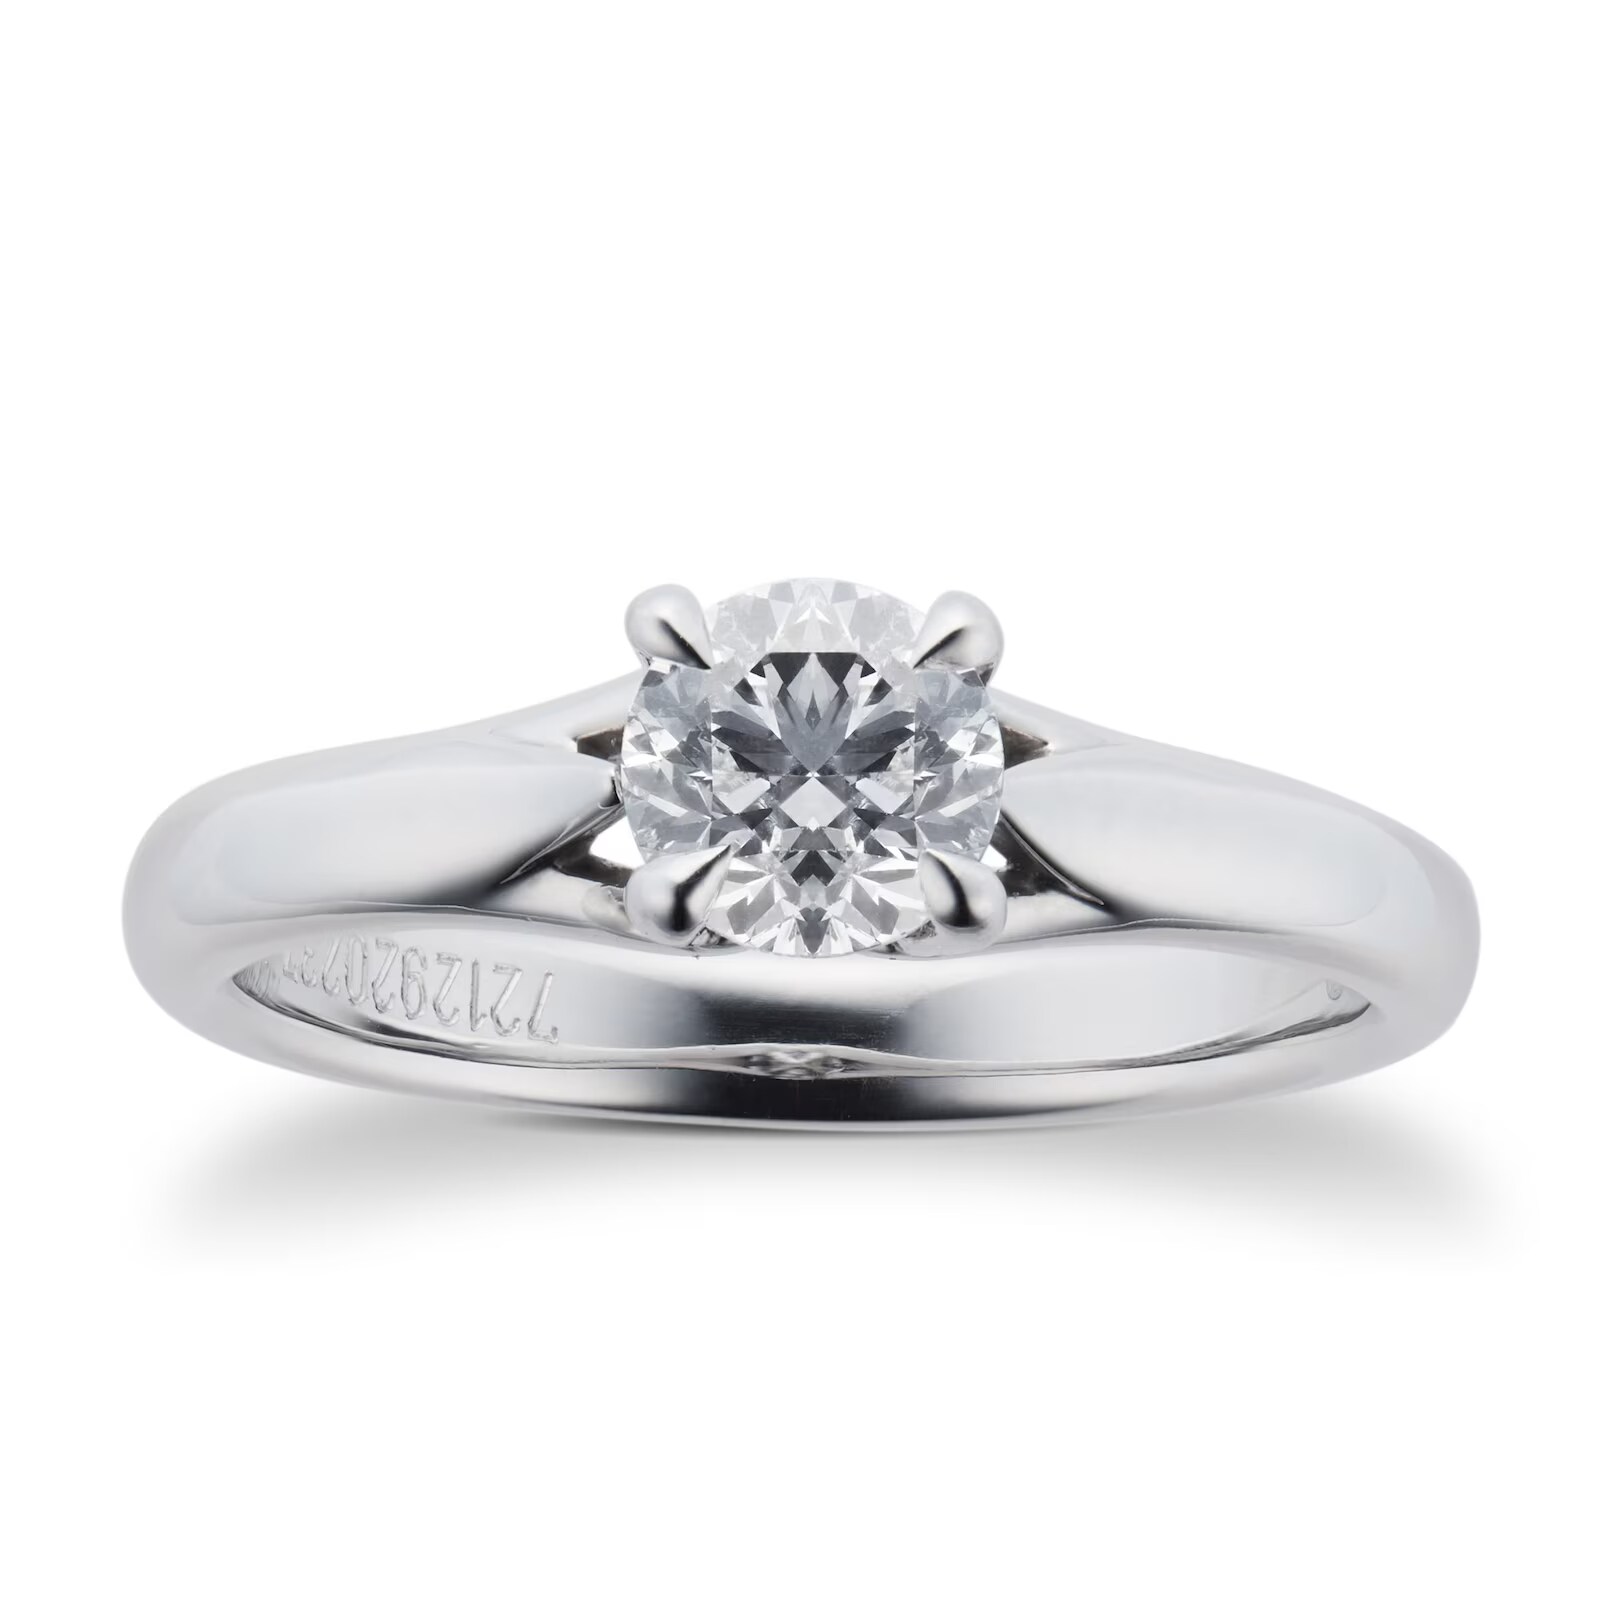 Ena Harkness Engagement Ring 0.70 Carat - Ring Size M